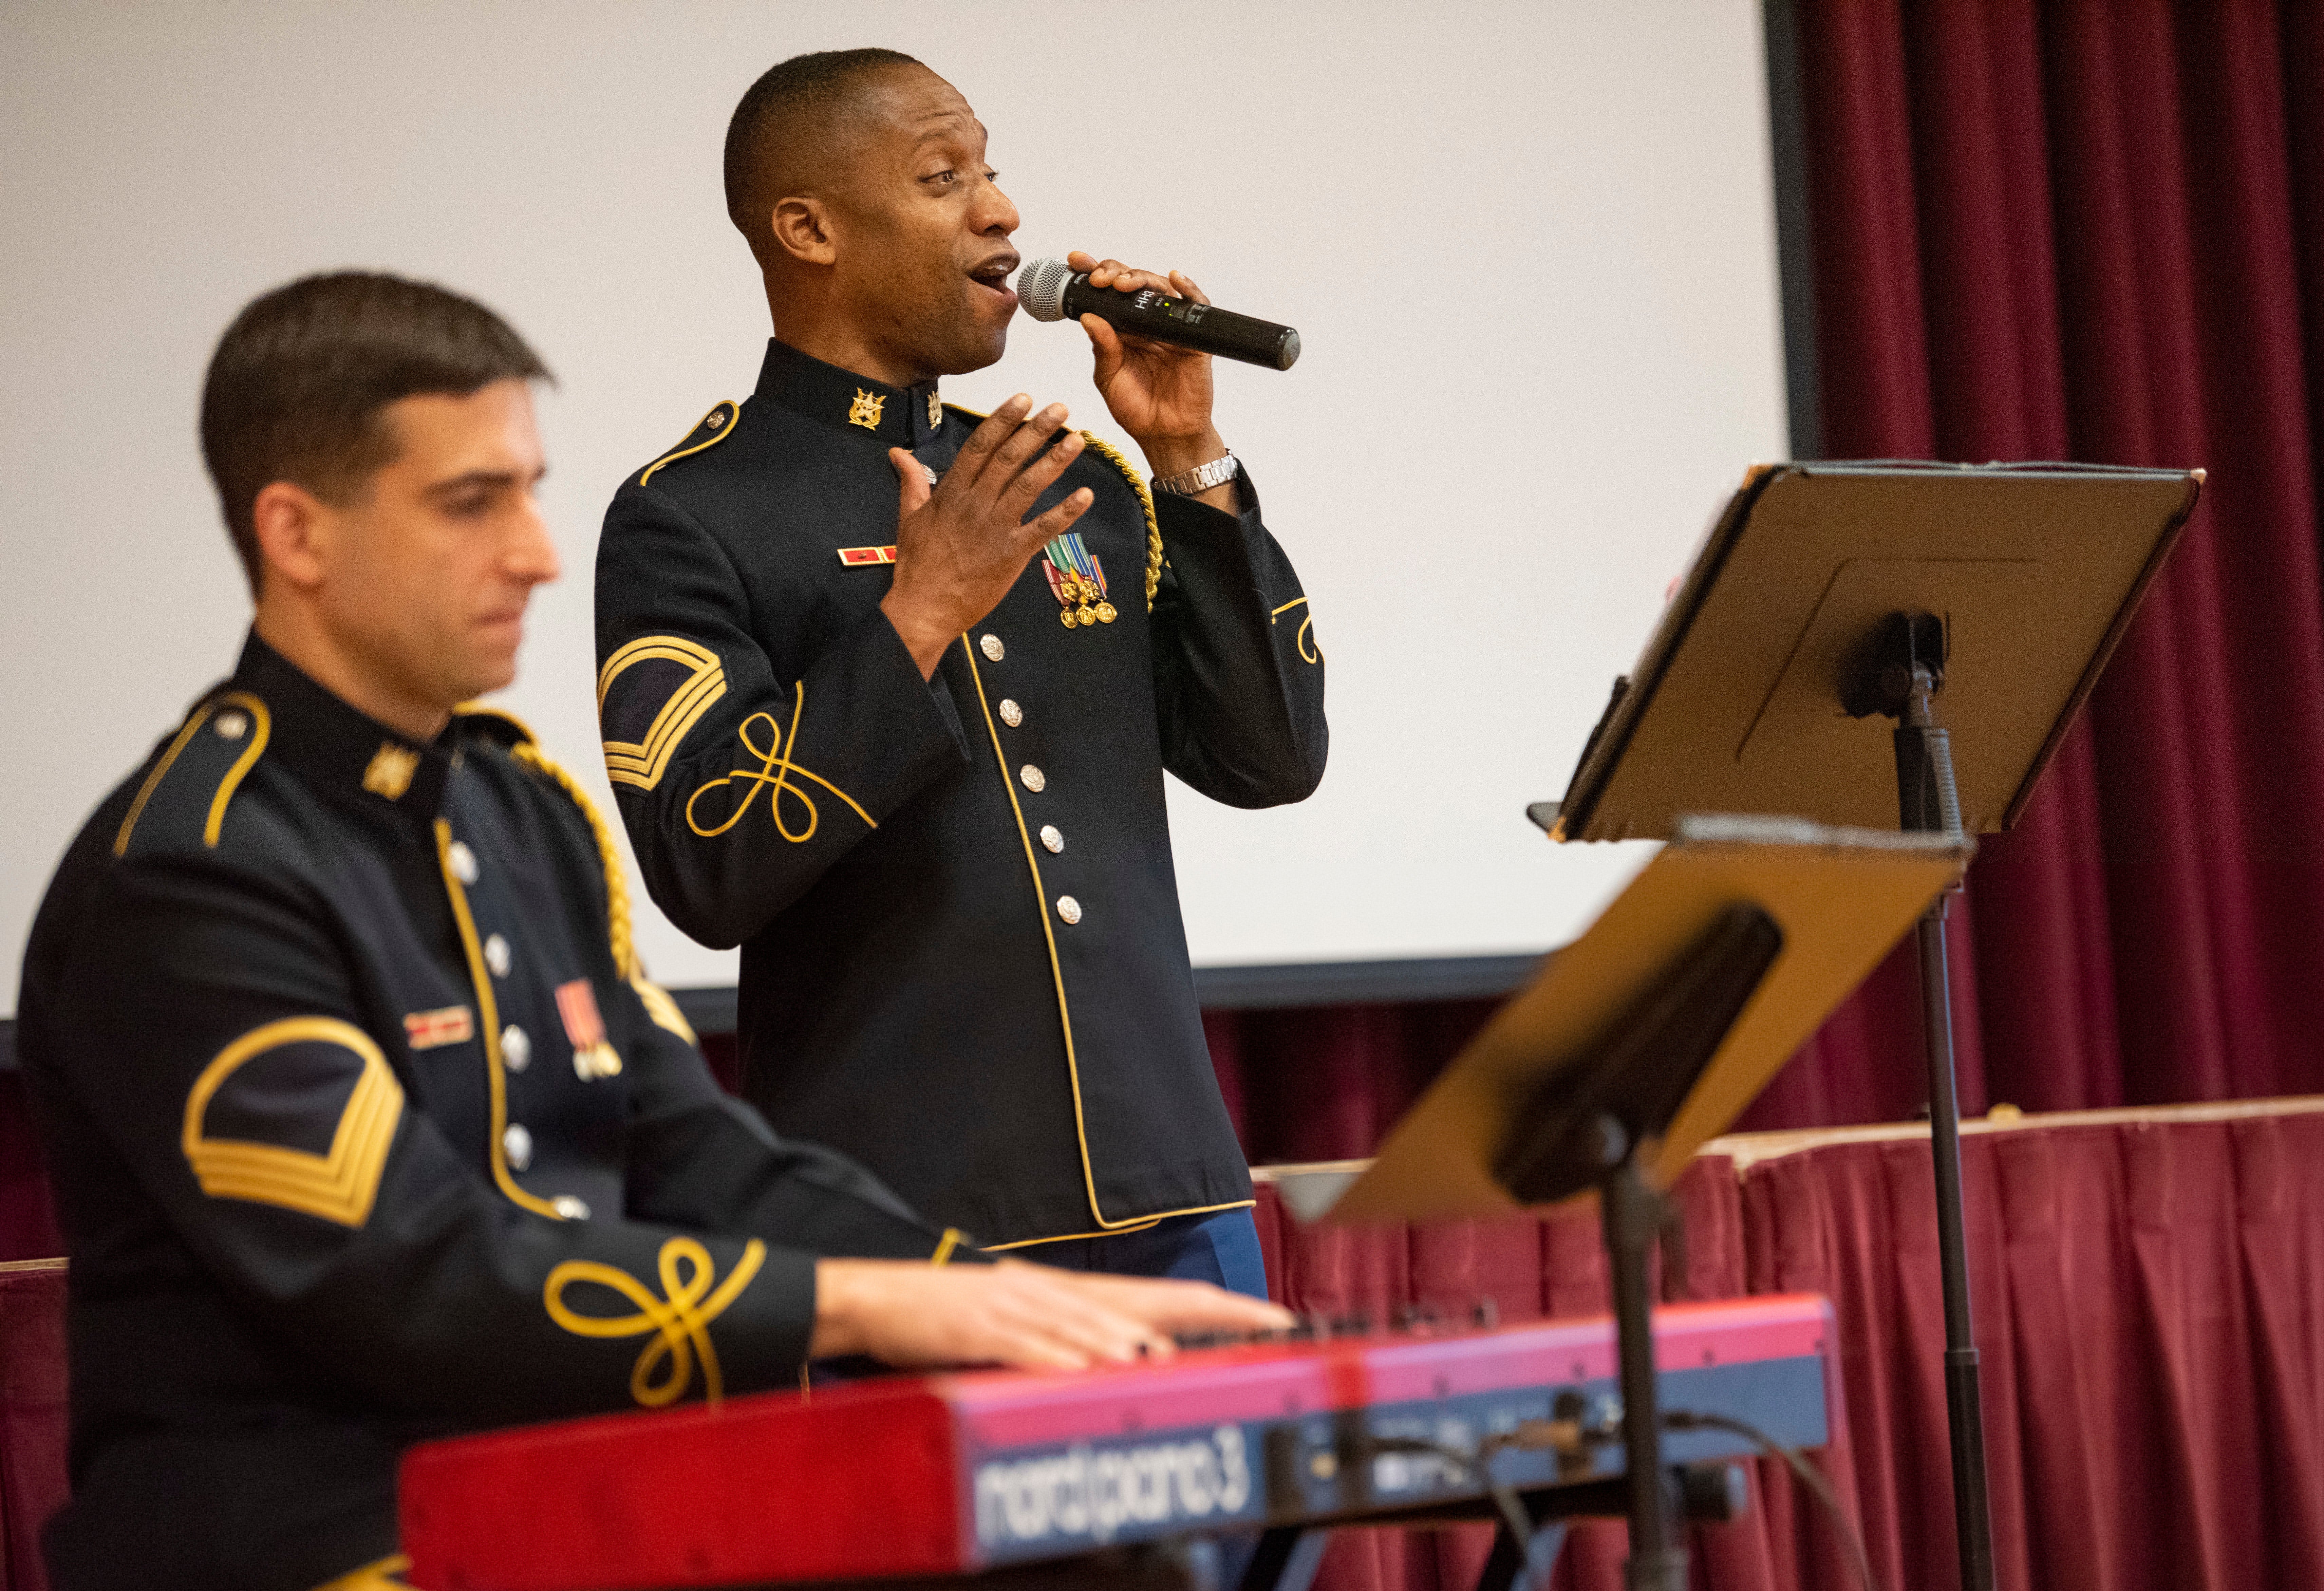 Army band honoring Martin Luther King